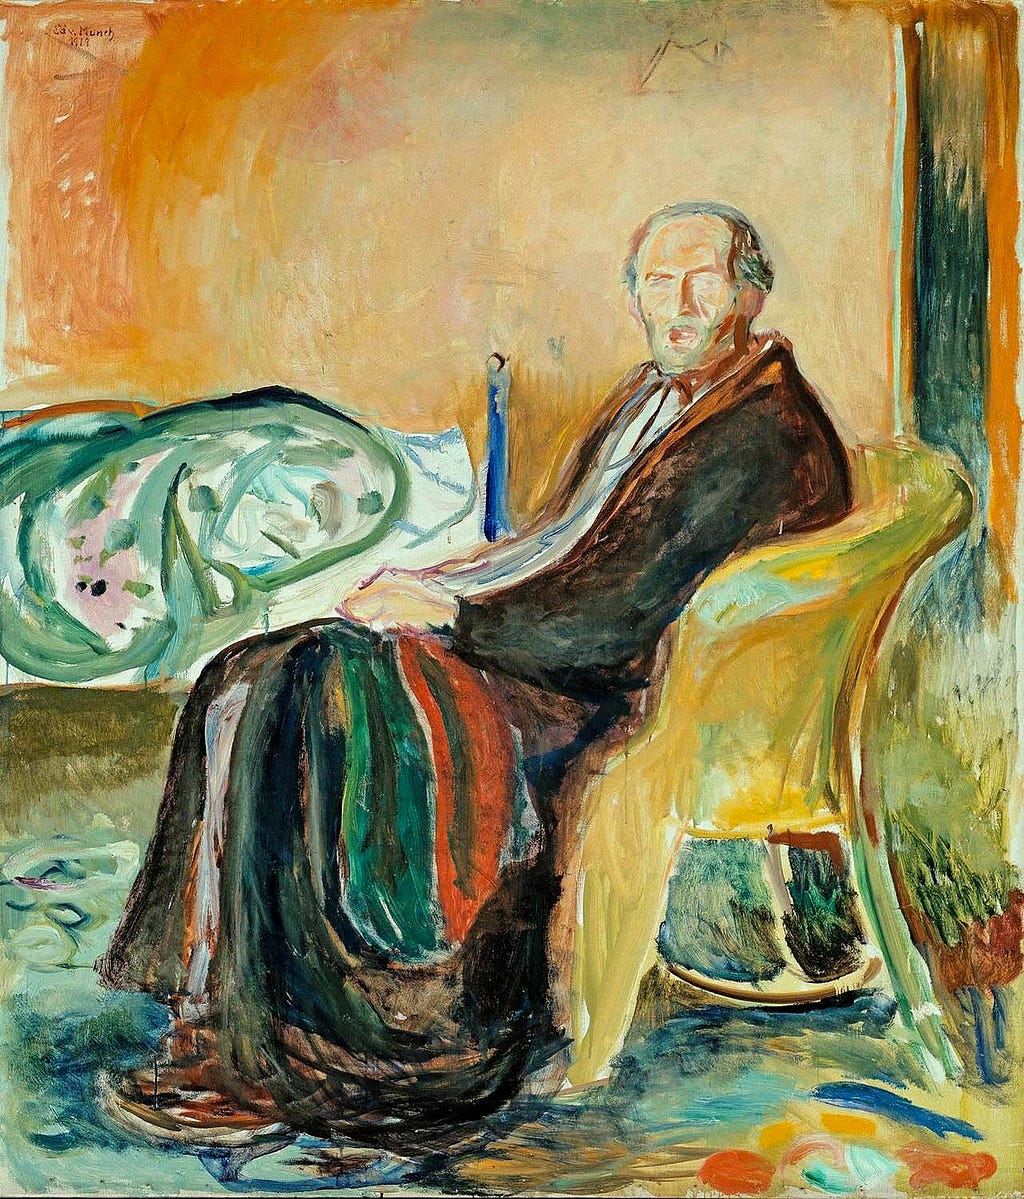 A man sits in a chair looking at the viewer